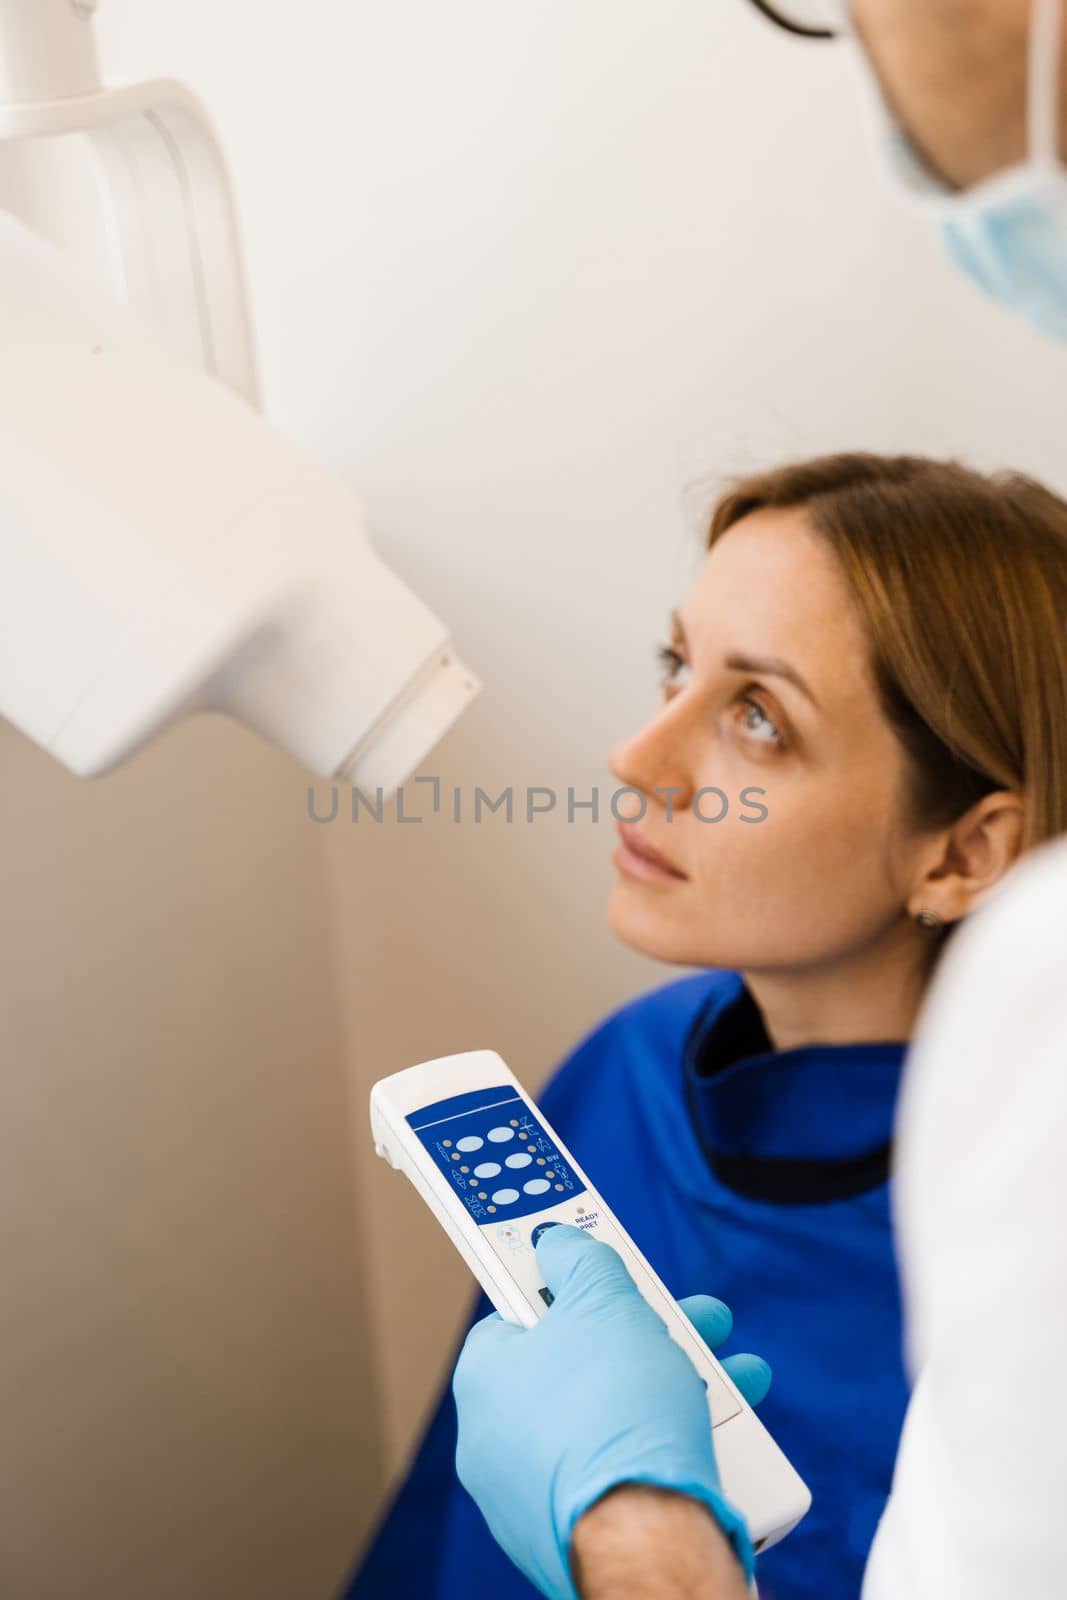 Teeth x ray scanning for detect toothache and treat roots. Dentist do x-ray tooth scan for woman in dentistry. by Rabizo